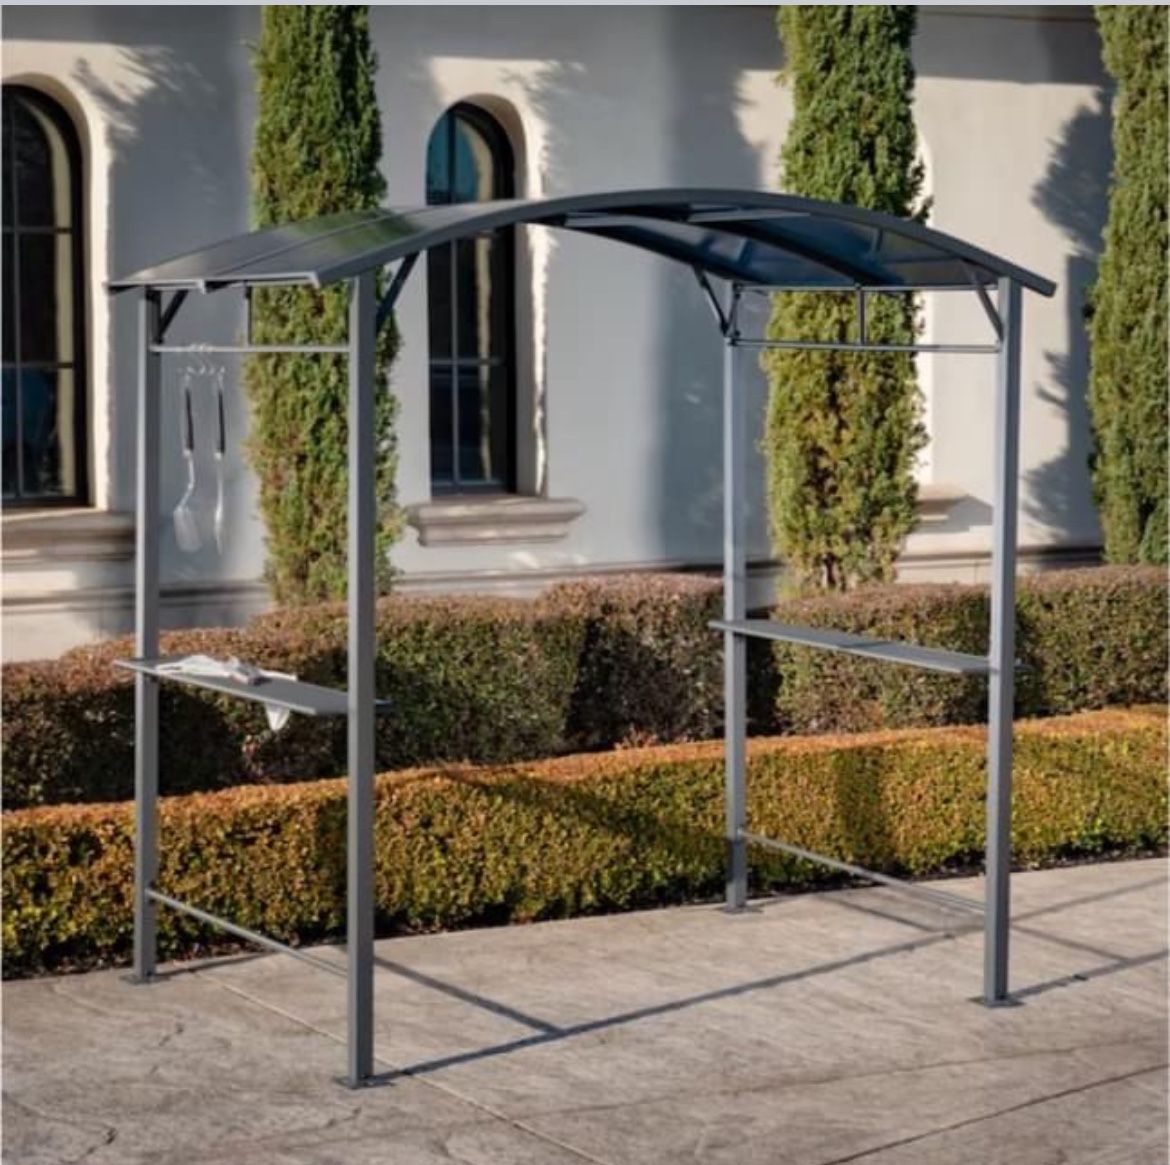 Outdoor Grill Gazebo 7.5' x 4.9' with Built-in Shelves,